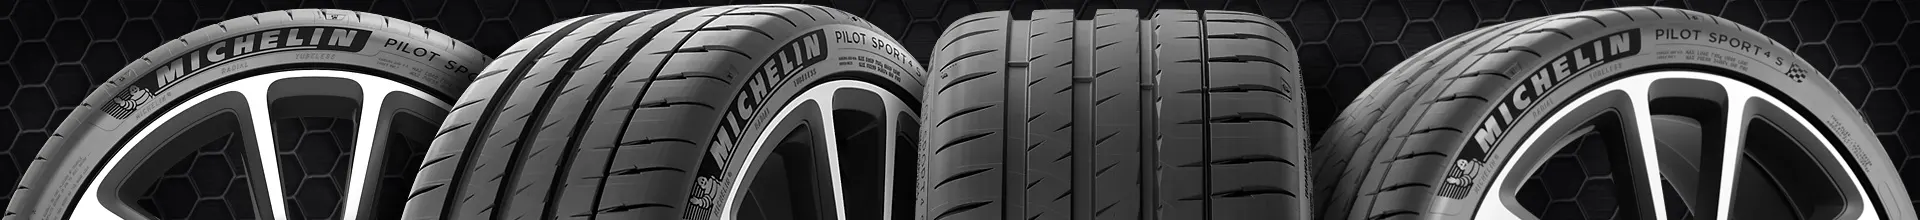 285 55 20 discount tires from Online Wheels Direct